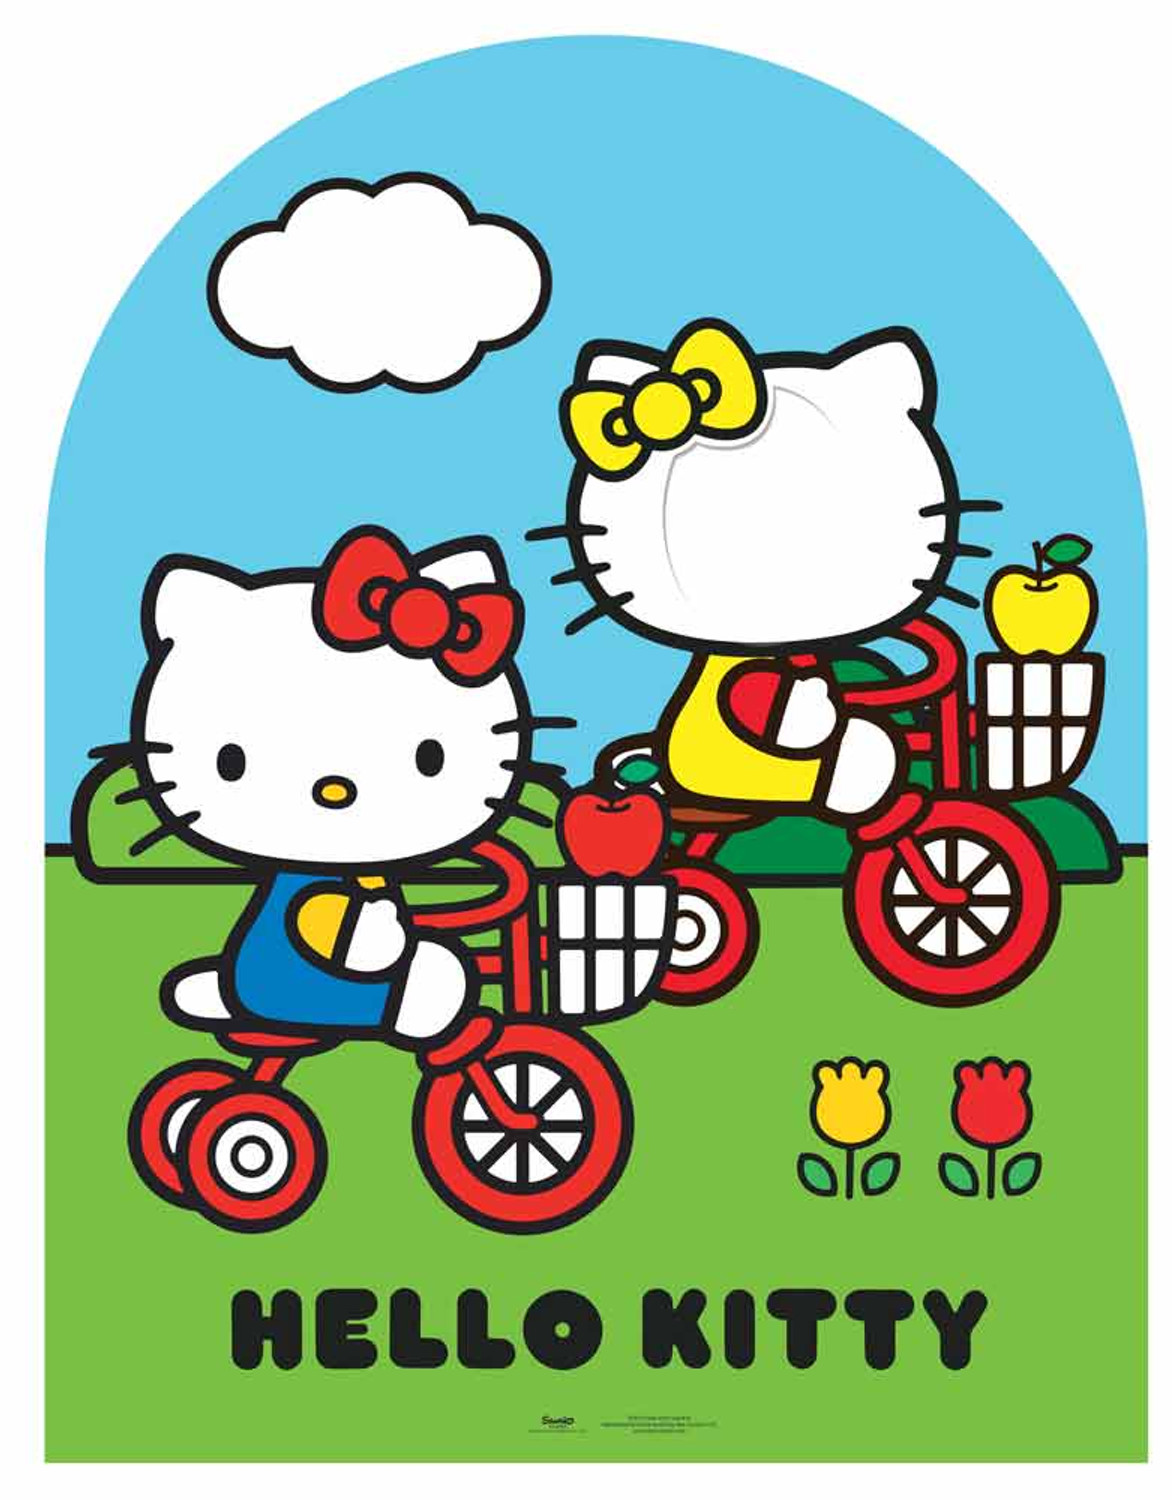 Child Size Hello Kitty and Mimmy Cardboard Stand-in Cutout / Standup  available now at starstills.com